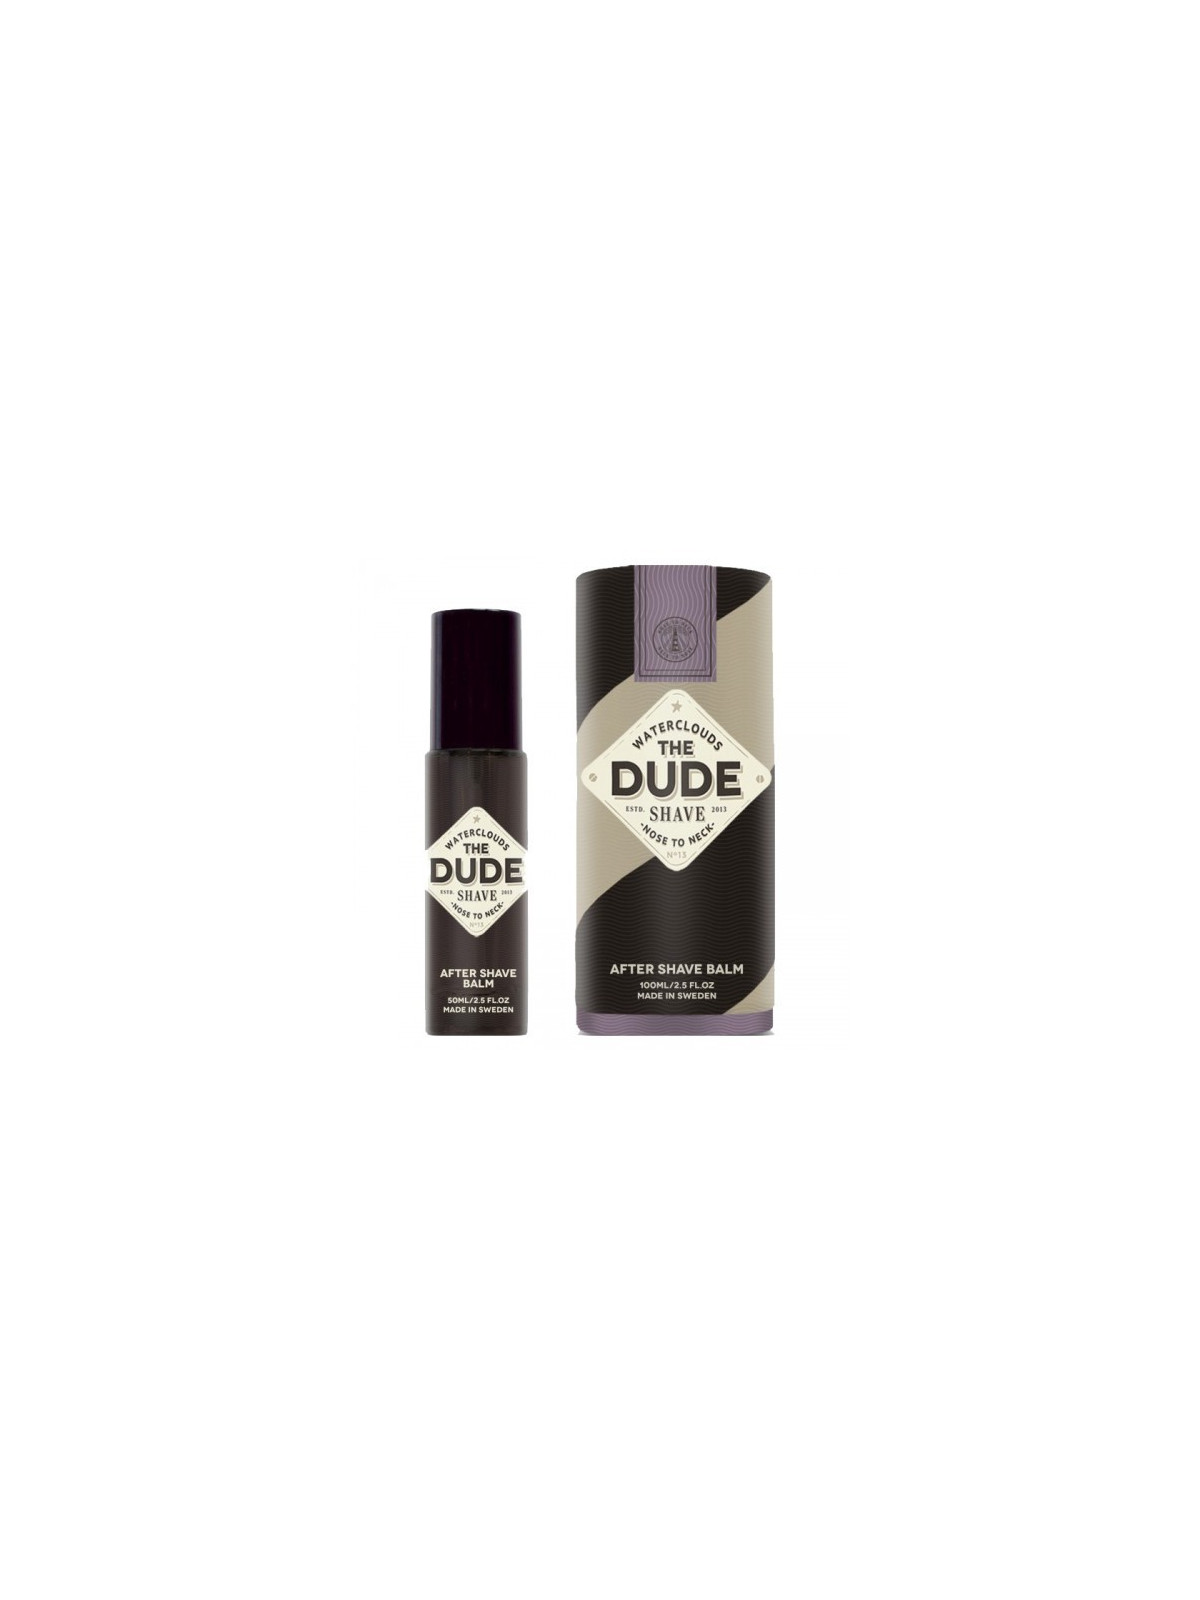 Waterclouds The Dude After Shave Balm balzamas po skutimosi (50ml)